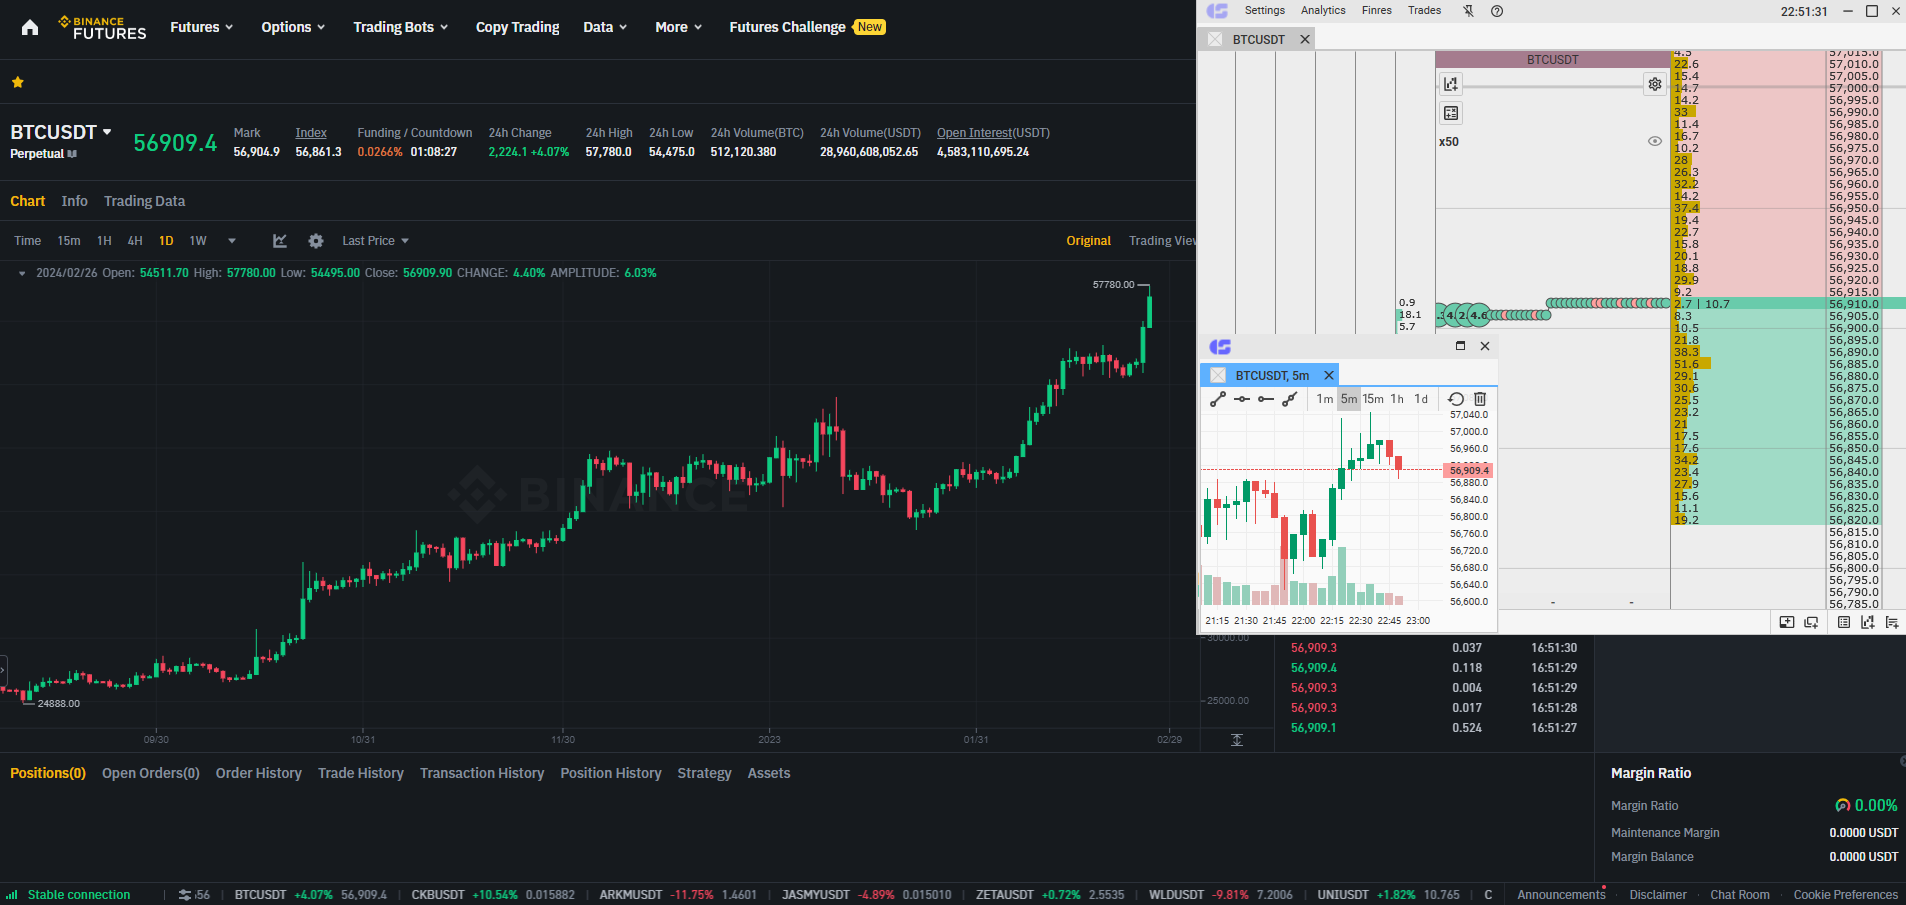 Binance futures tactics are explained within the CScalp trading terminal